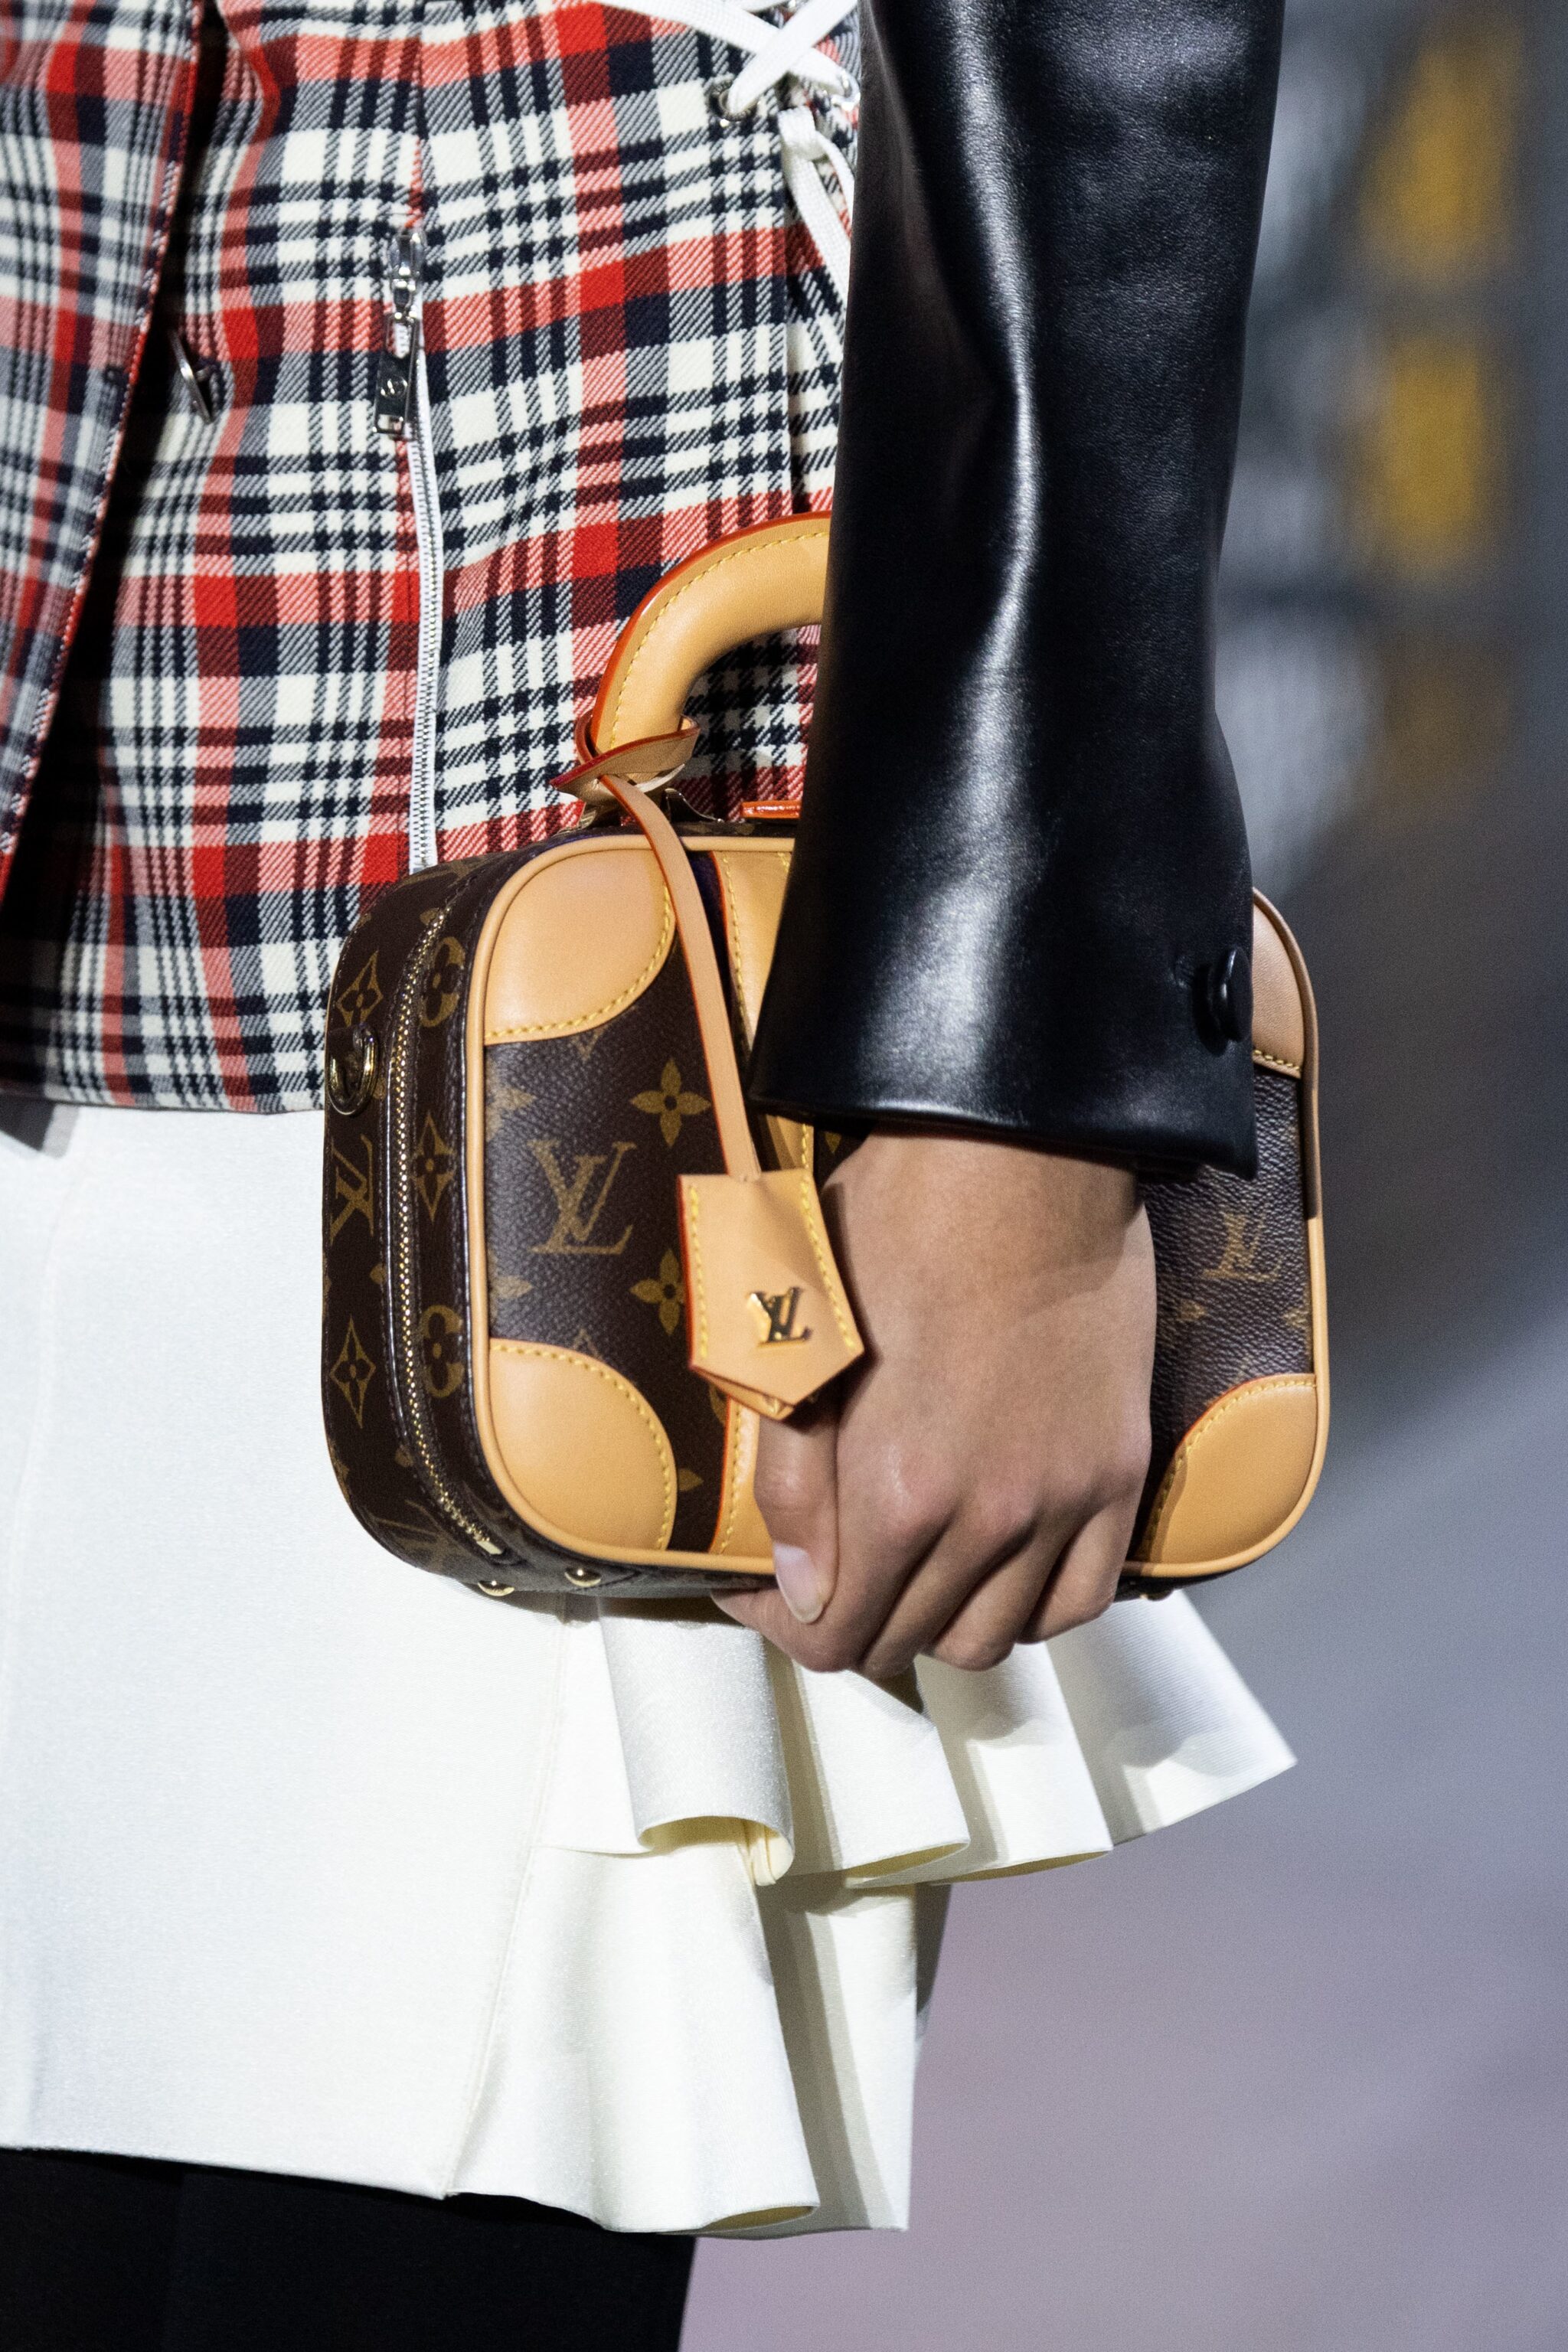 Vuitton Fall/Winter Runway Bag Collection Spotted Fashion